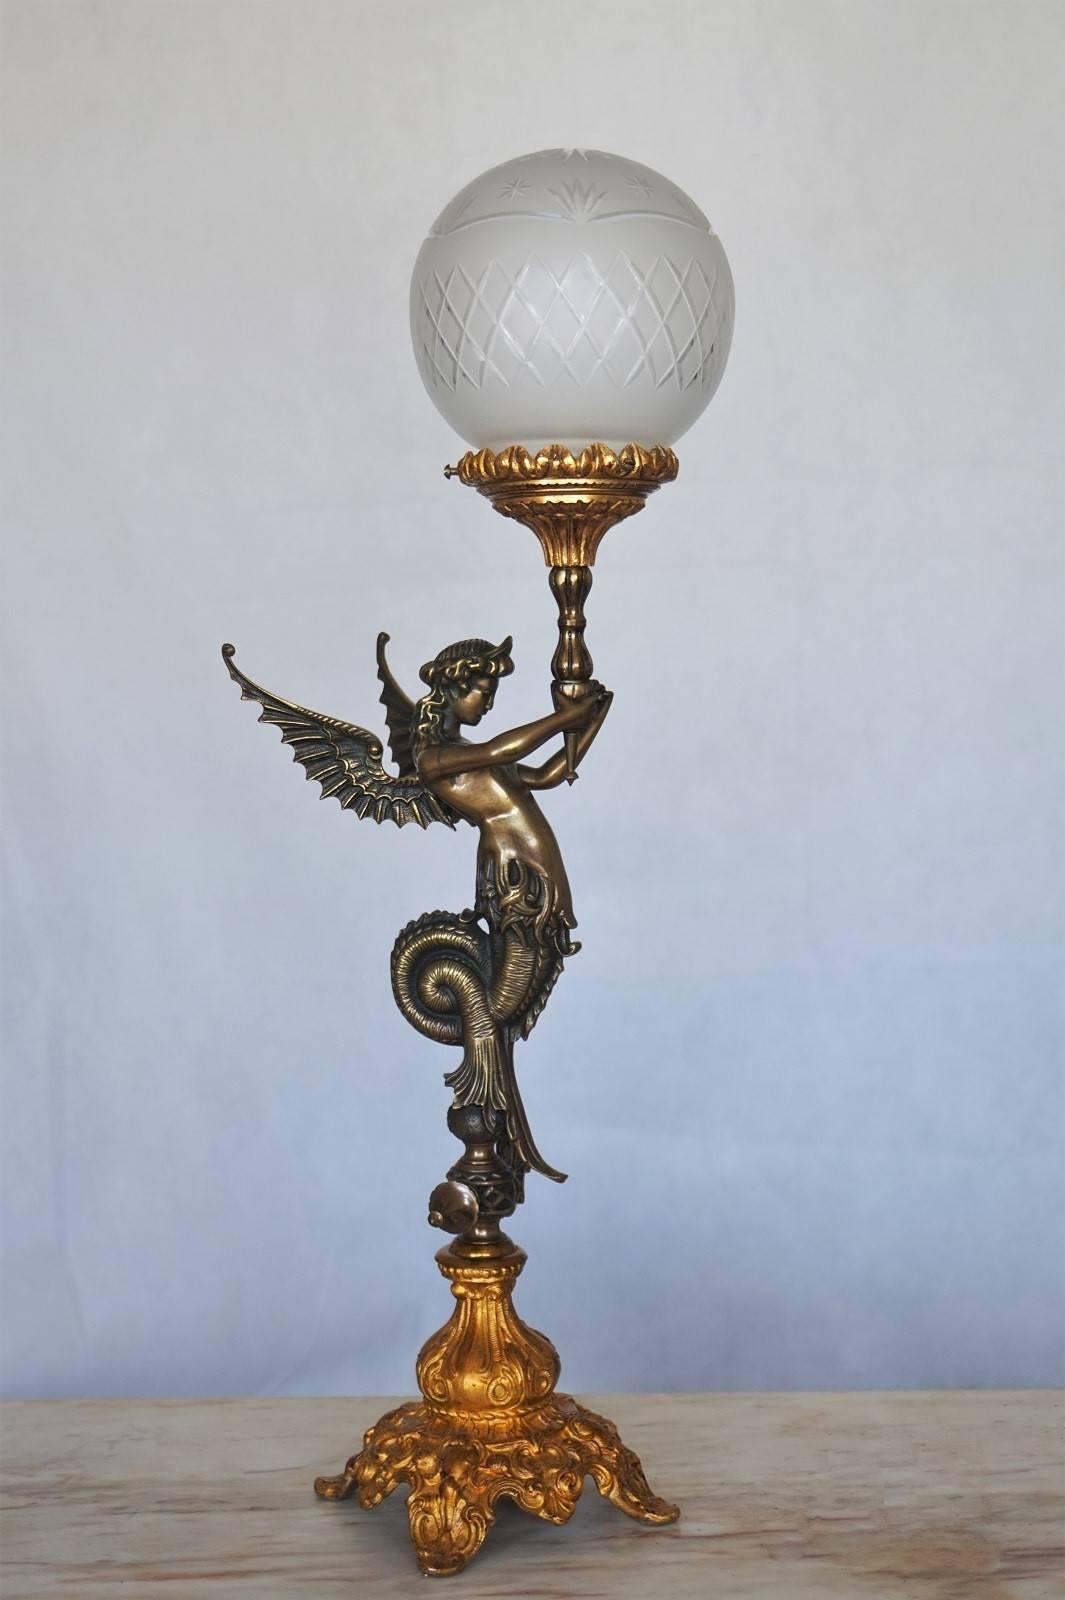 Late 19th century Empire style winged figural bronze table lamp with gilded bronze base and lamp holder, with crystal ball shade.
This piece has been electrified at a later time.

Height with shade: 24 1/2 in (62 cm)
Height without shade: 19 1/4 in